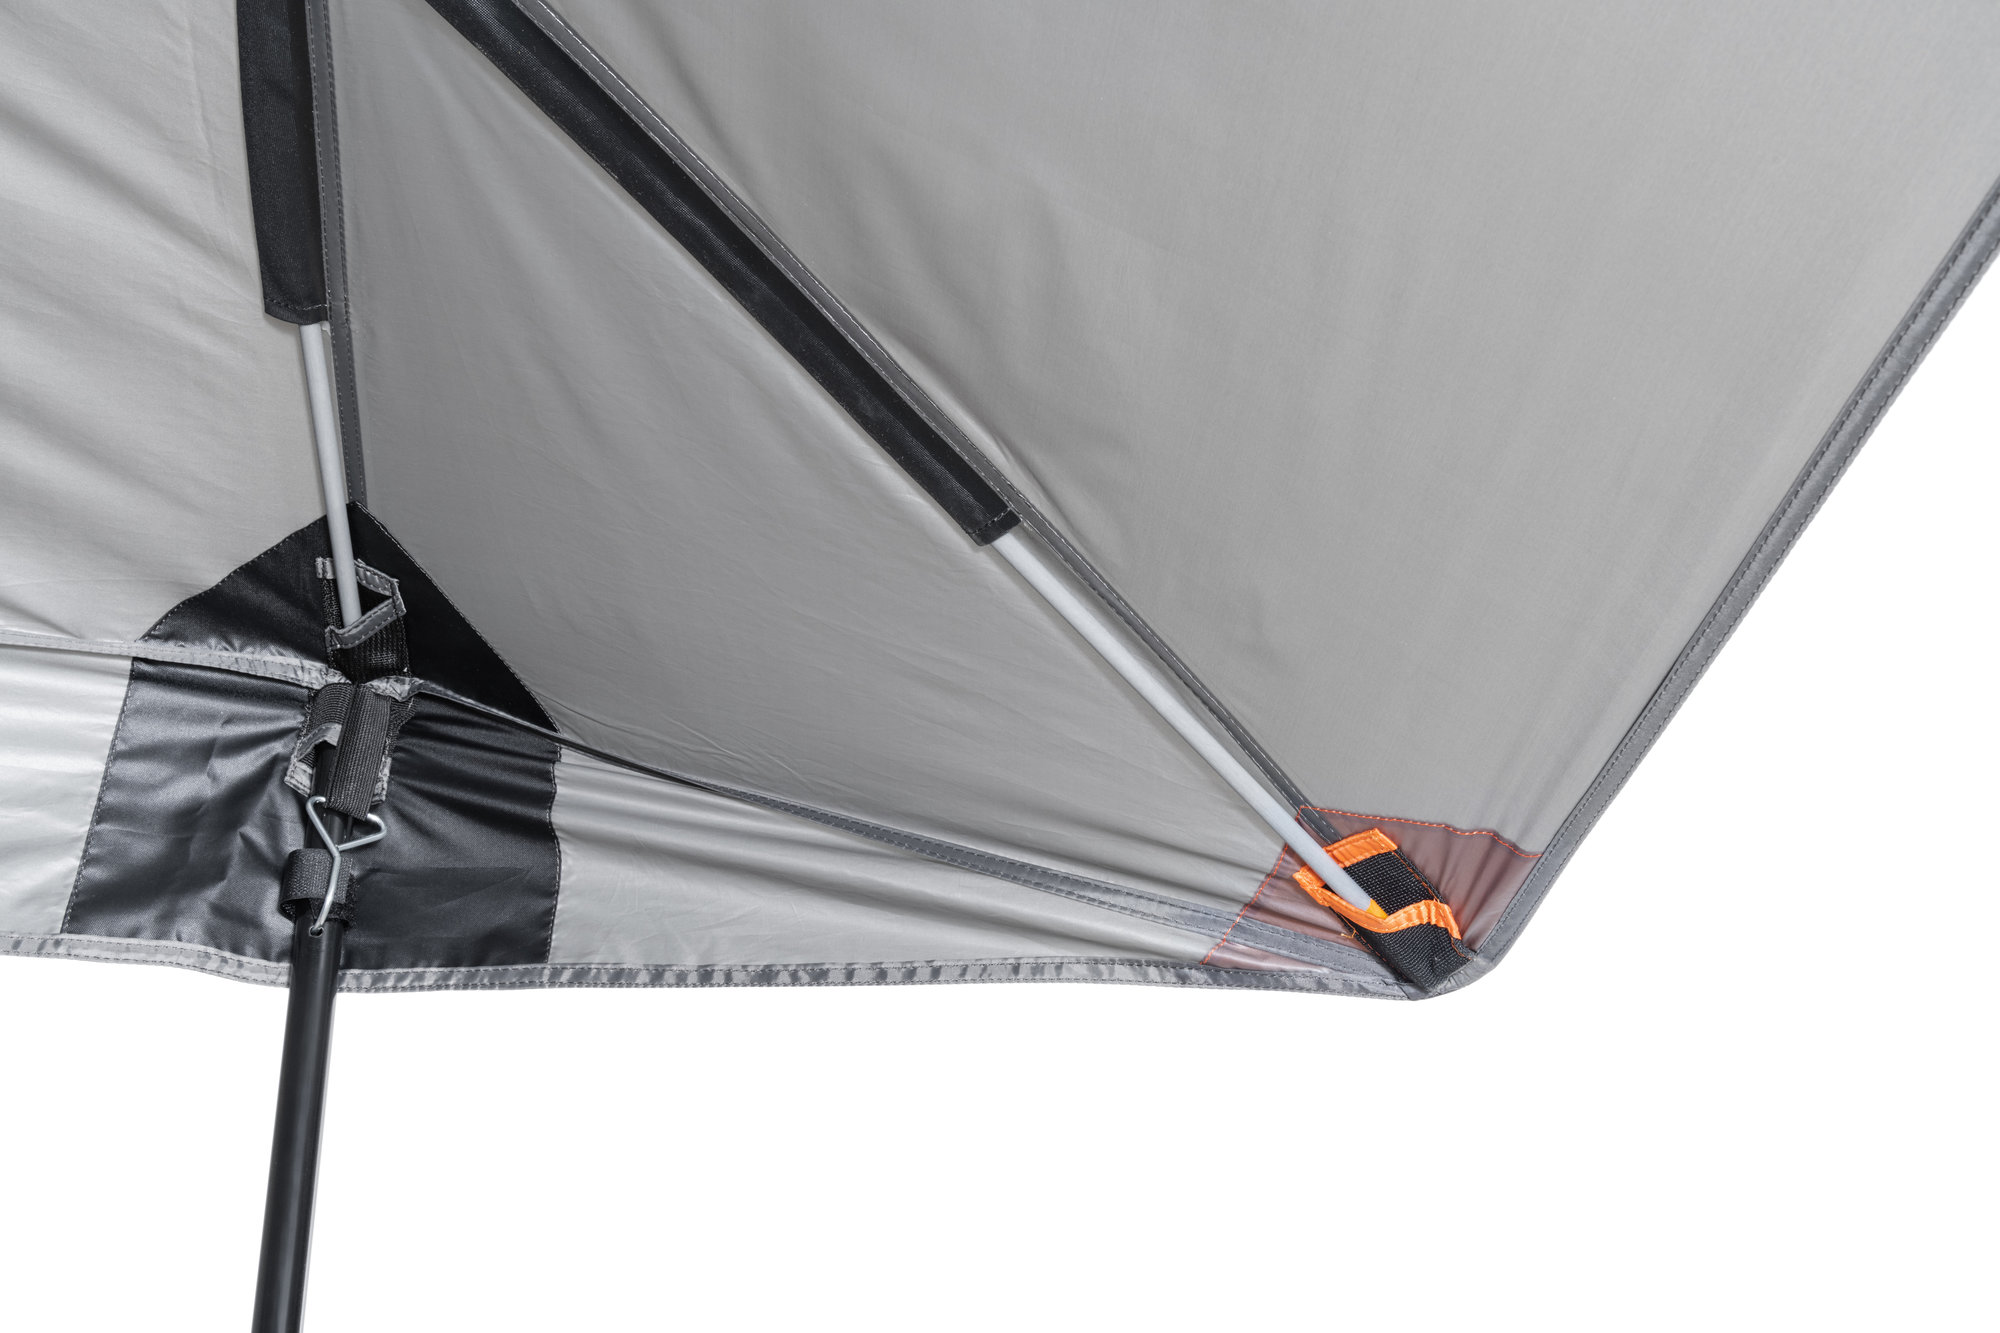 Rightline Gear 110930 SUV Tailgating Canopy